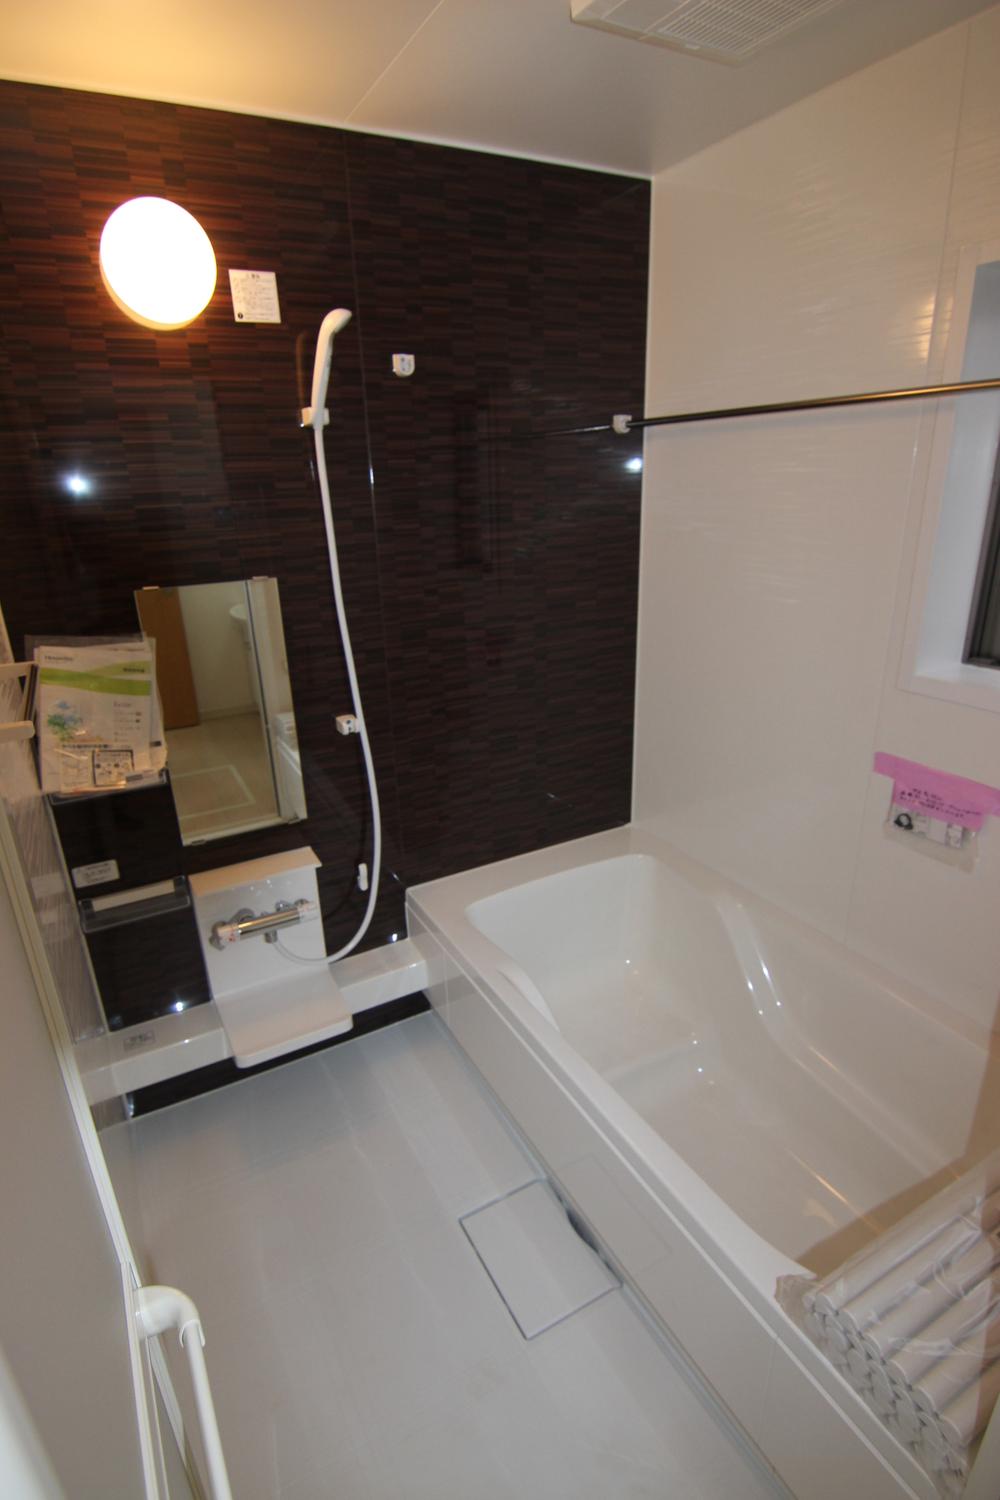 Bathroom. Unit bus of 1 pyeong type is space to put together with your children.